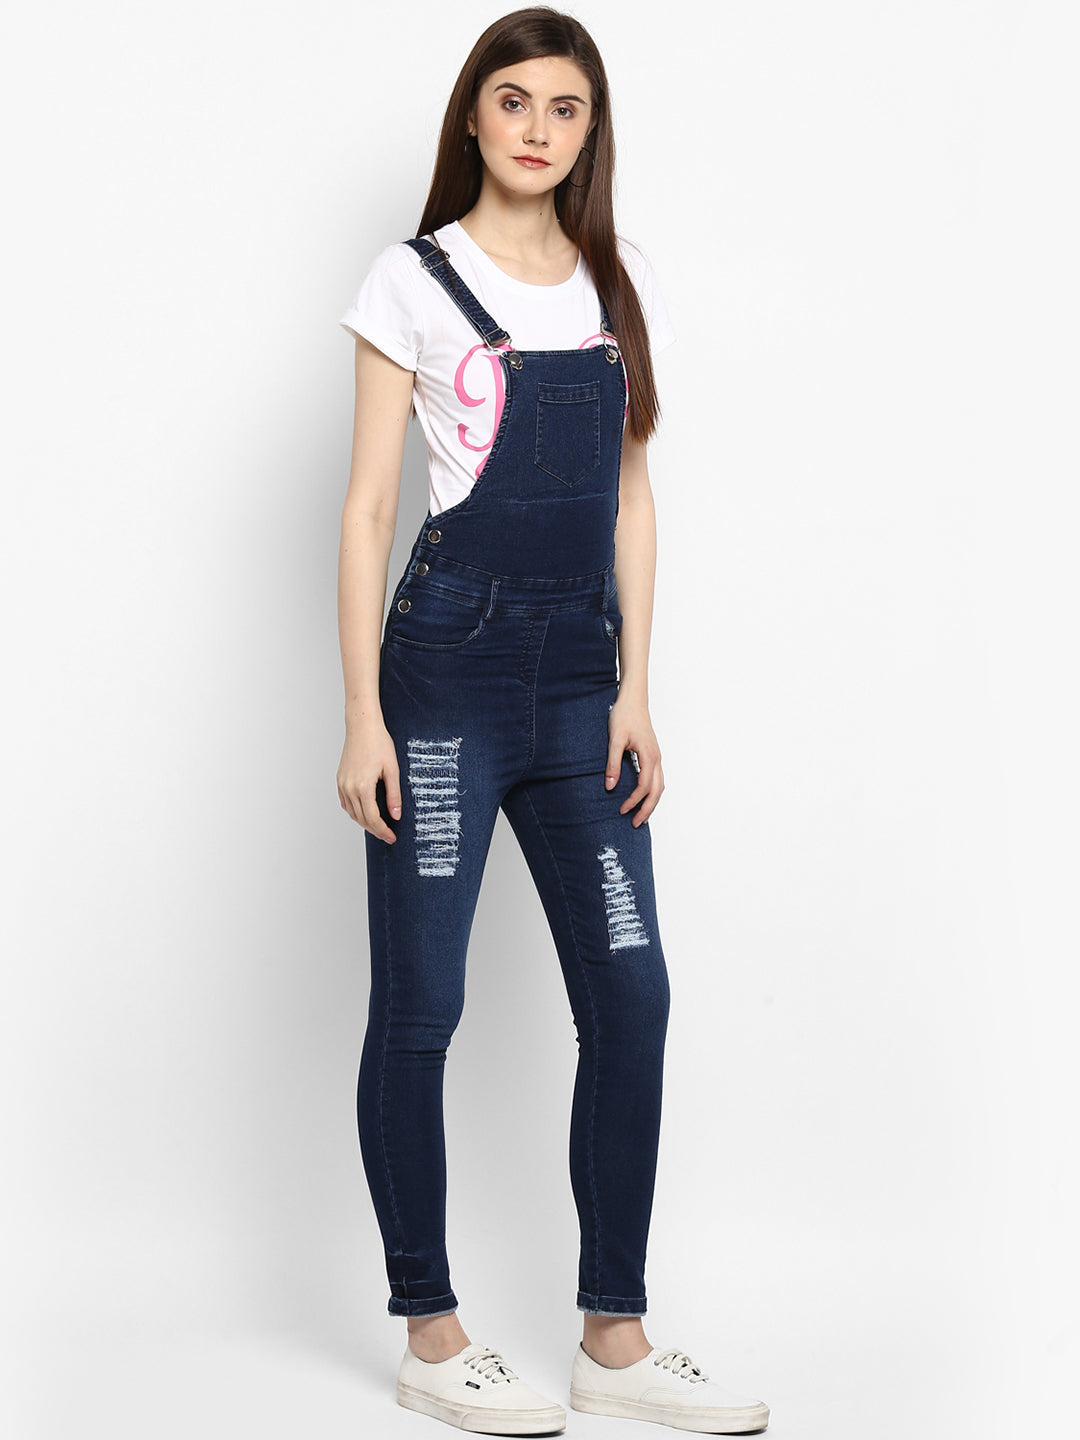 Women's Stretchable Denim Washed effect Capri Style Dungarees(inner not provided)